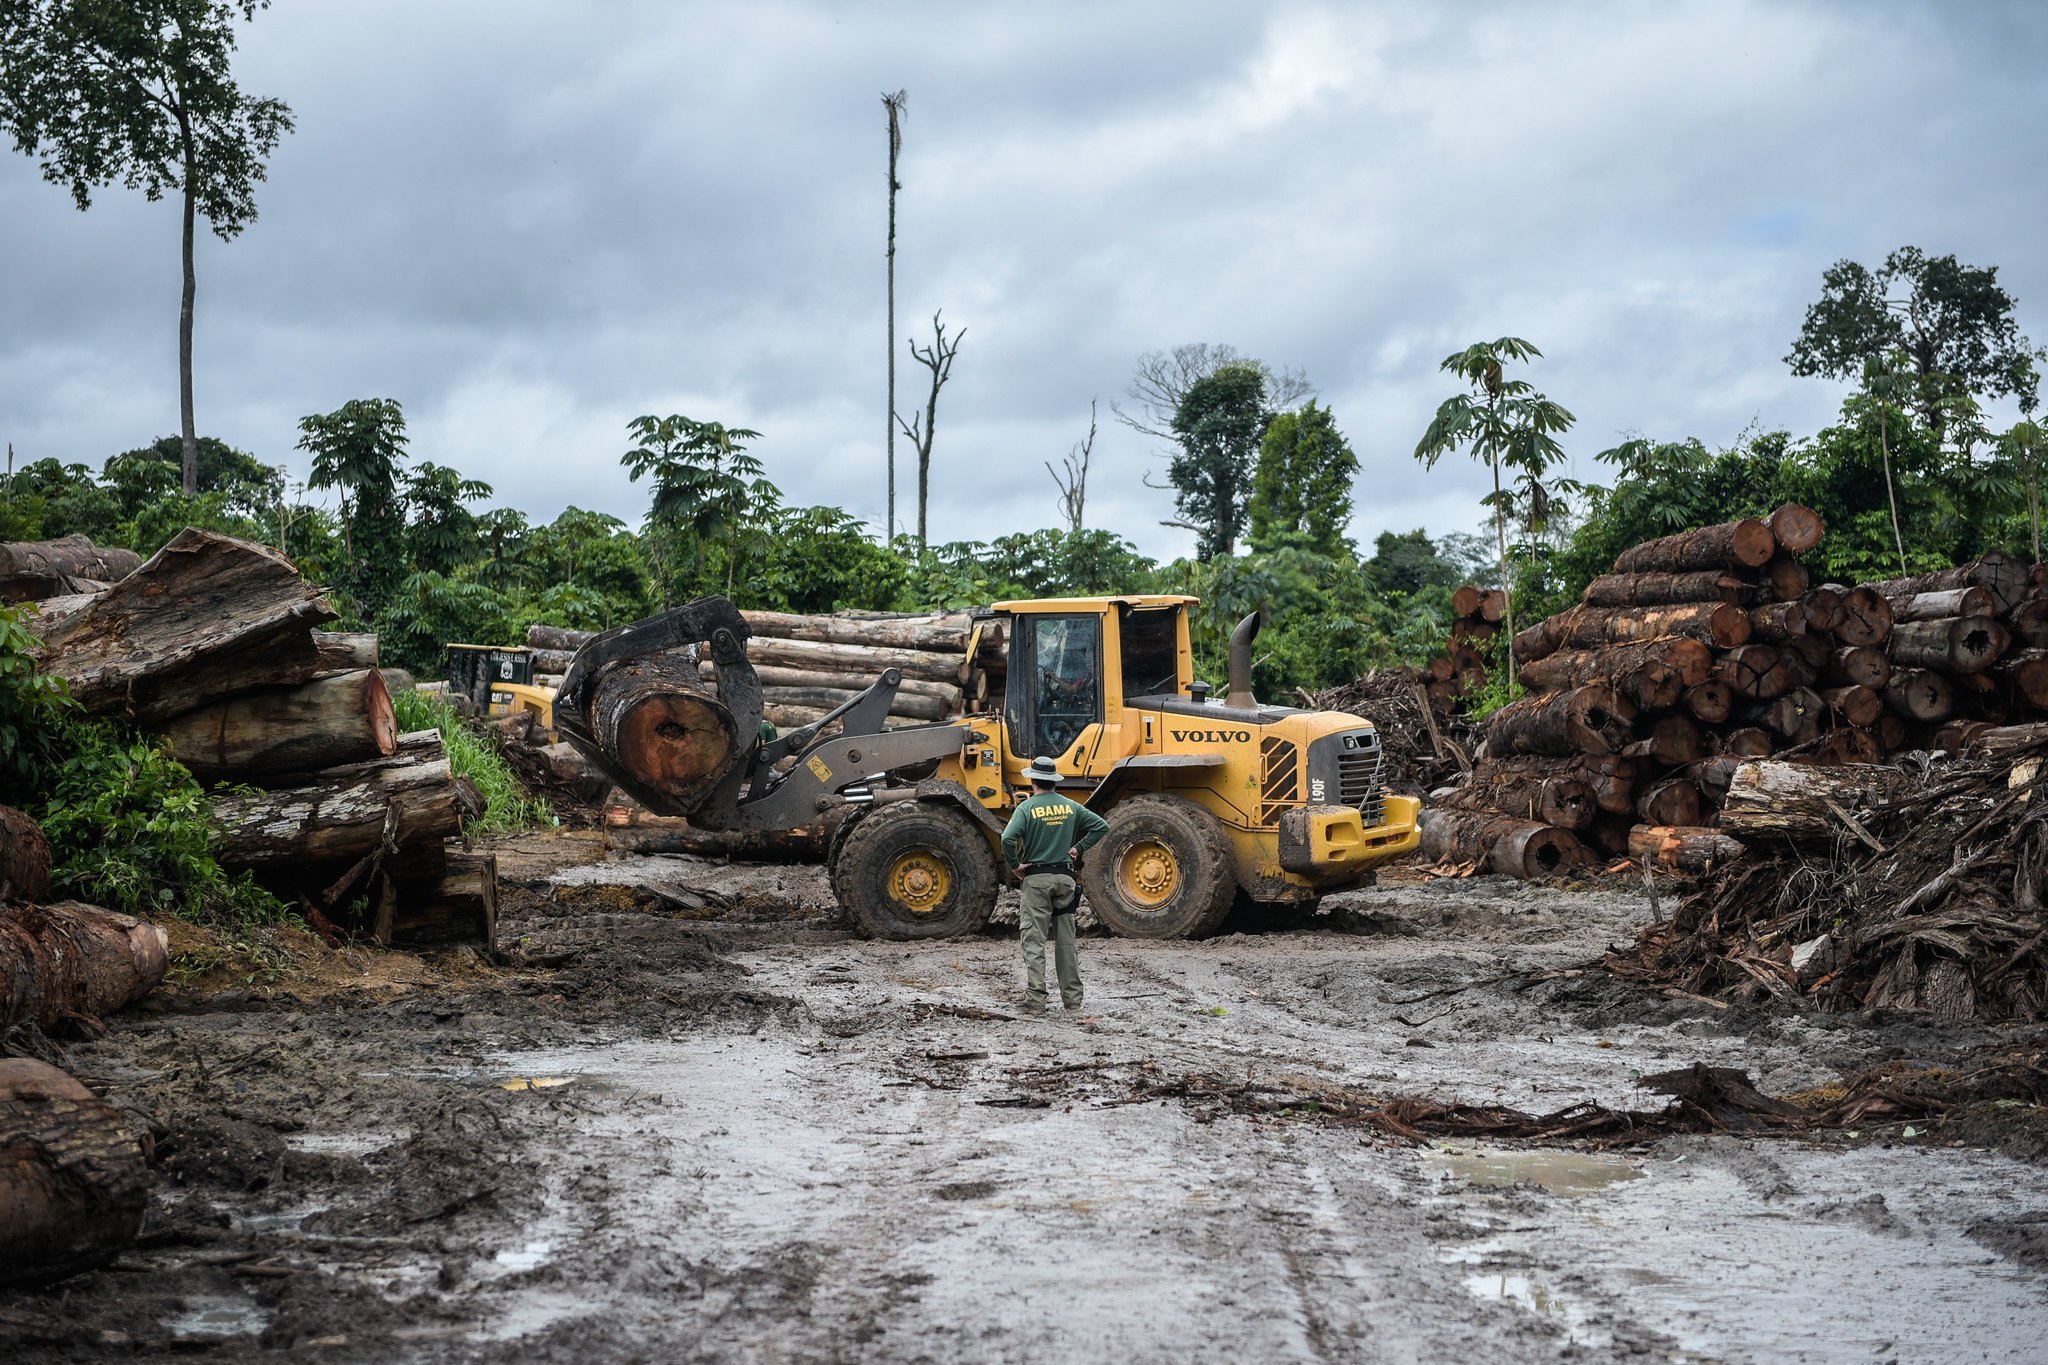 <p>Brazil&#8217;s environmental protection agency IBAMA on a 2018 operation in the Amazon (image: <a href="https://www.flickr.com/photos/ibamagov/41558033125/in/photostream/">IBAMA</a>)</p>